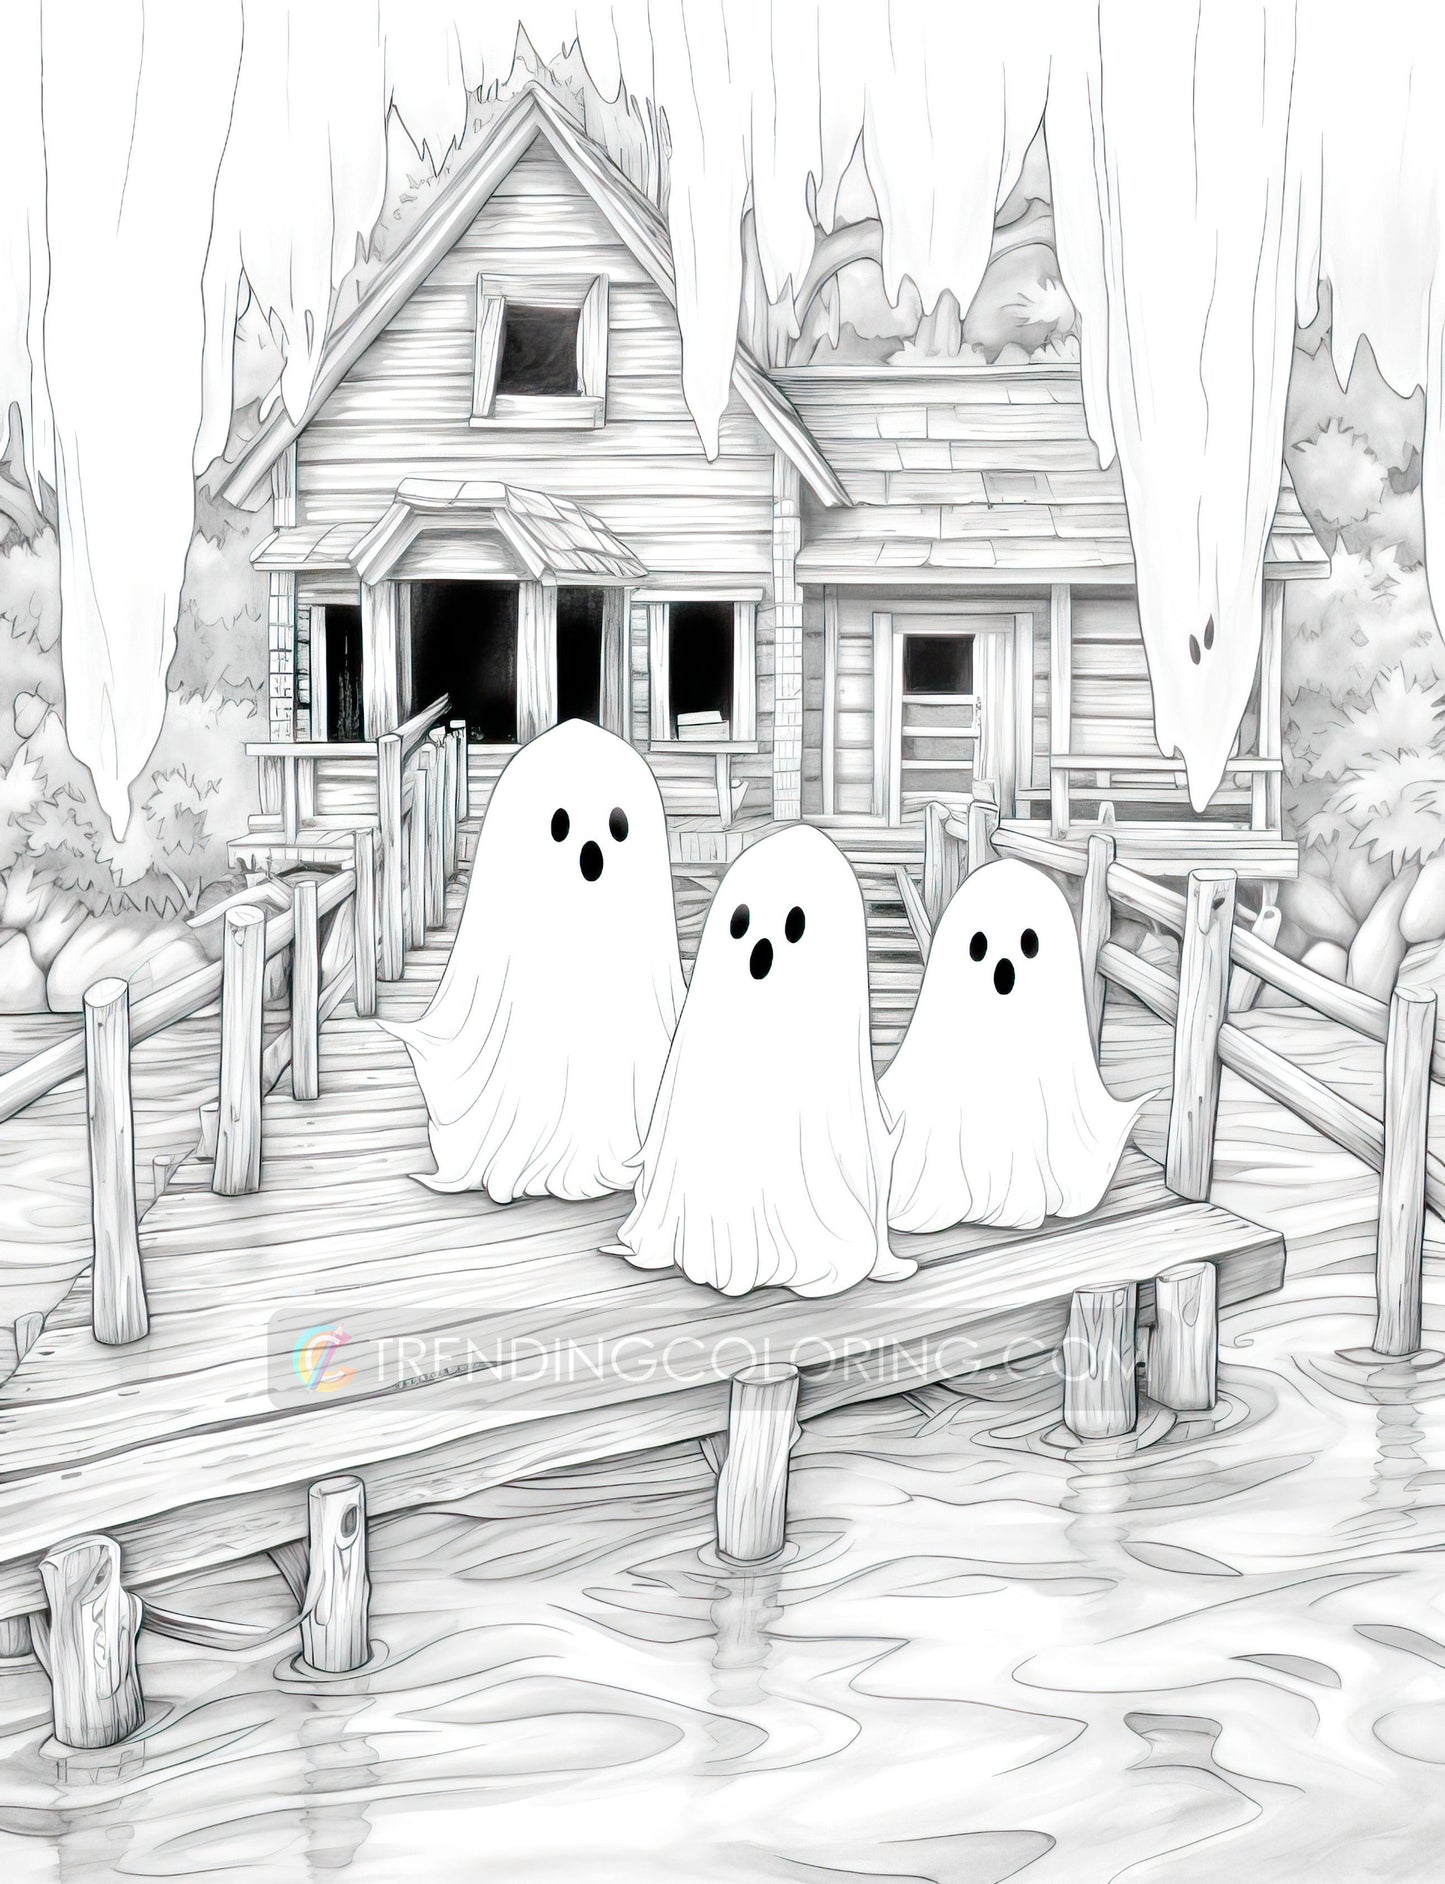 25 Halloween Little Ghost Grayscale Coloring Pages - Instant Download - Printable Dark/Light